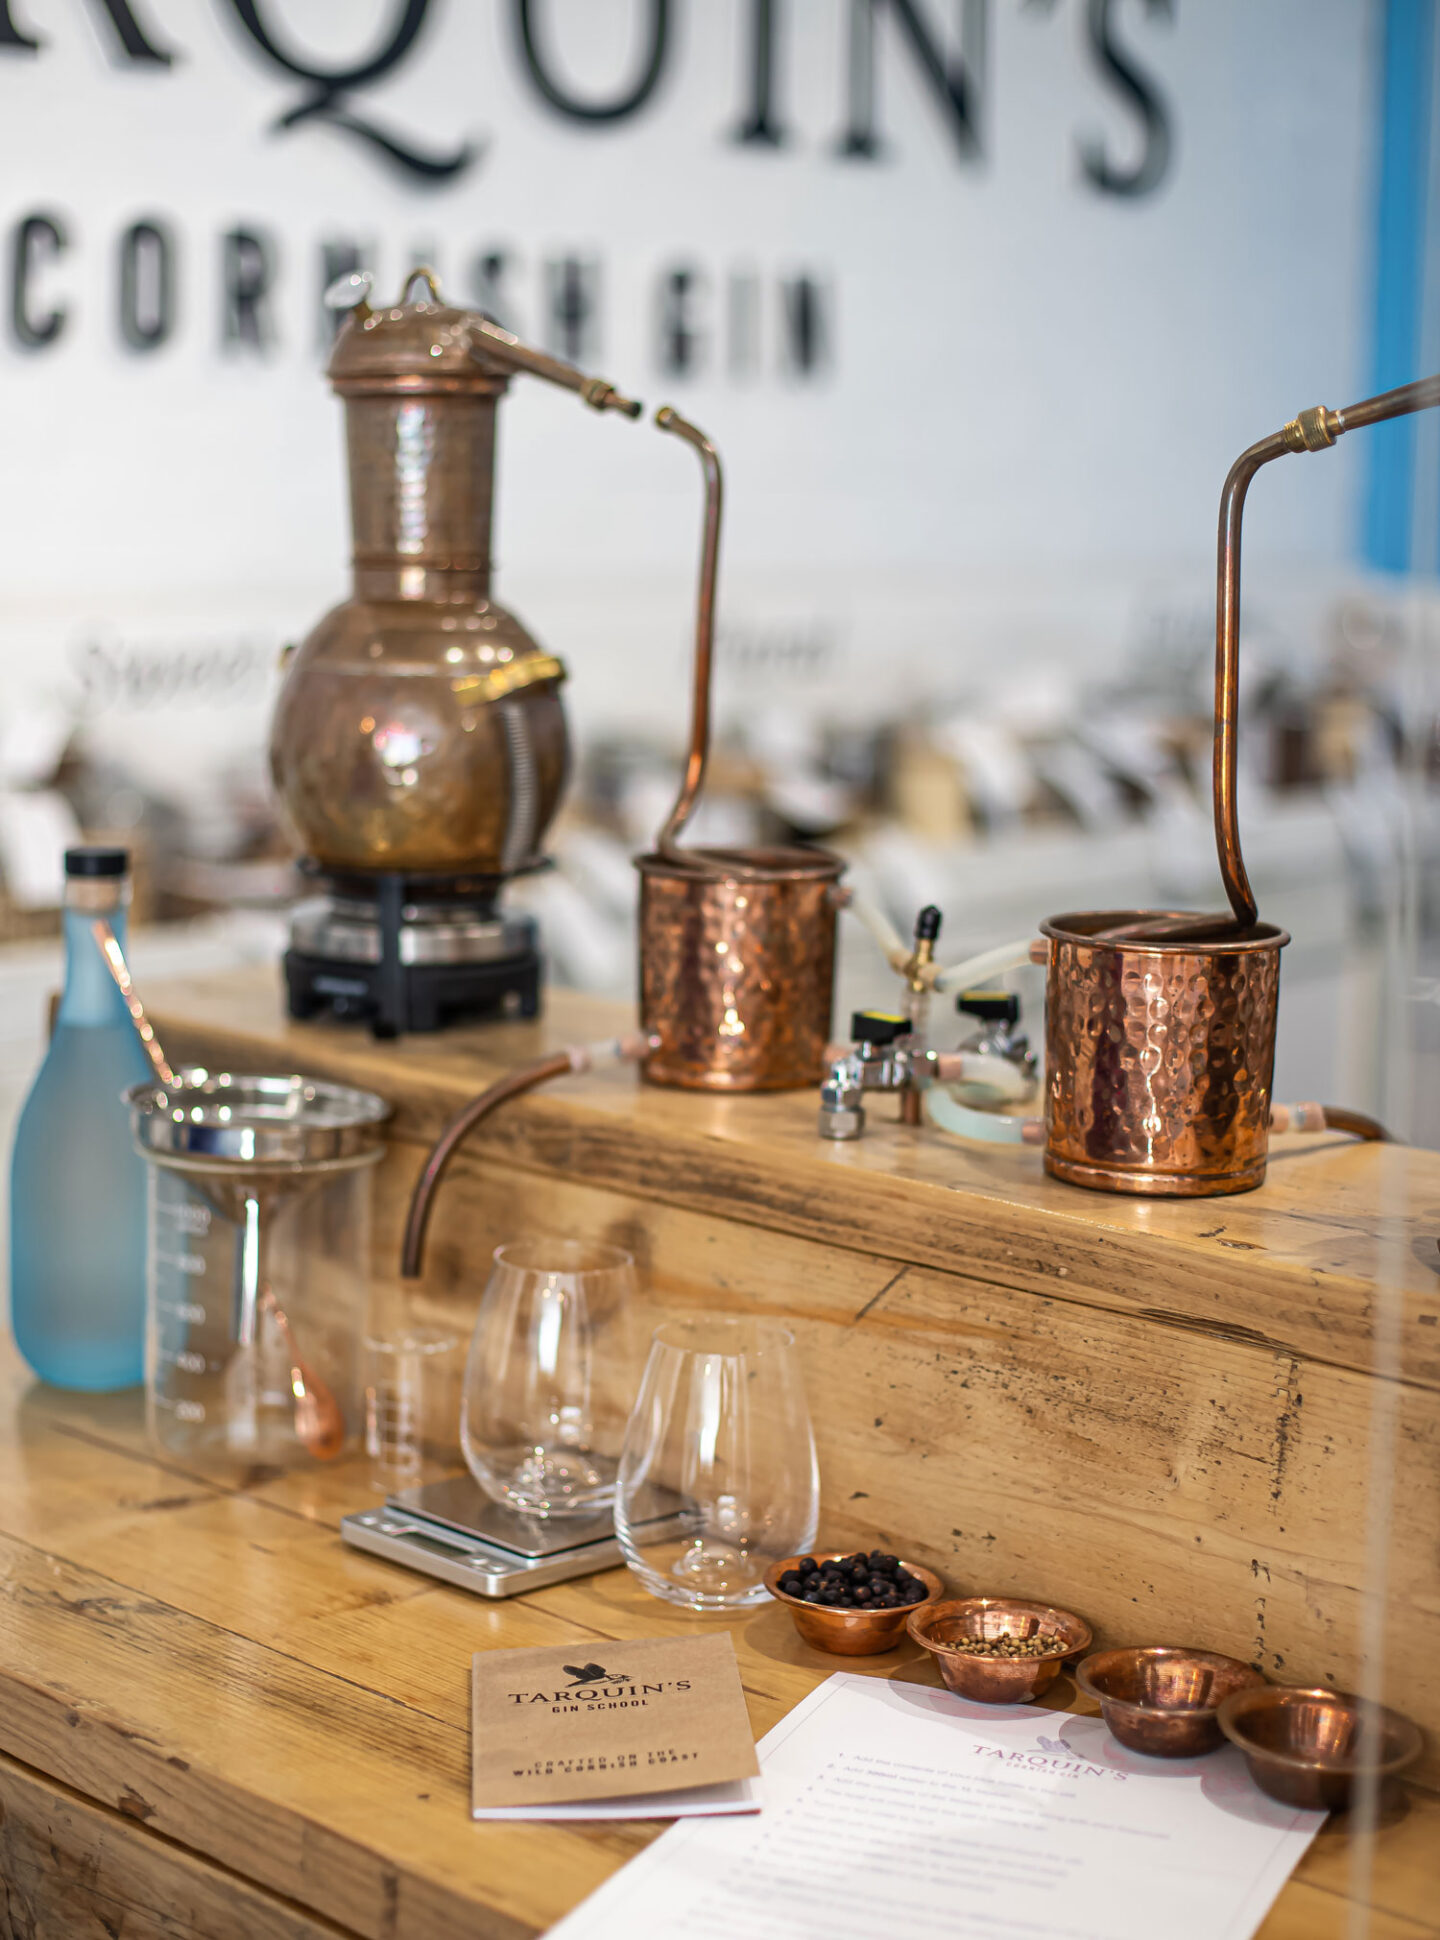 A detailed setup at Tarquin's Cornish Gin distillery showcasing copper stills used for gin making. On the wooden table are various distilling equipment including glass beakers, gin glasses, and small copper bowls filled with botanicals. A booklet titled "Tarquin's Gin School" and a recipe sheet are also visible, indicating an educational and interactive gin-making experience. The background features the distillery's logo, emphasizing the artisanal nature of the process.